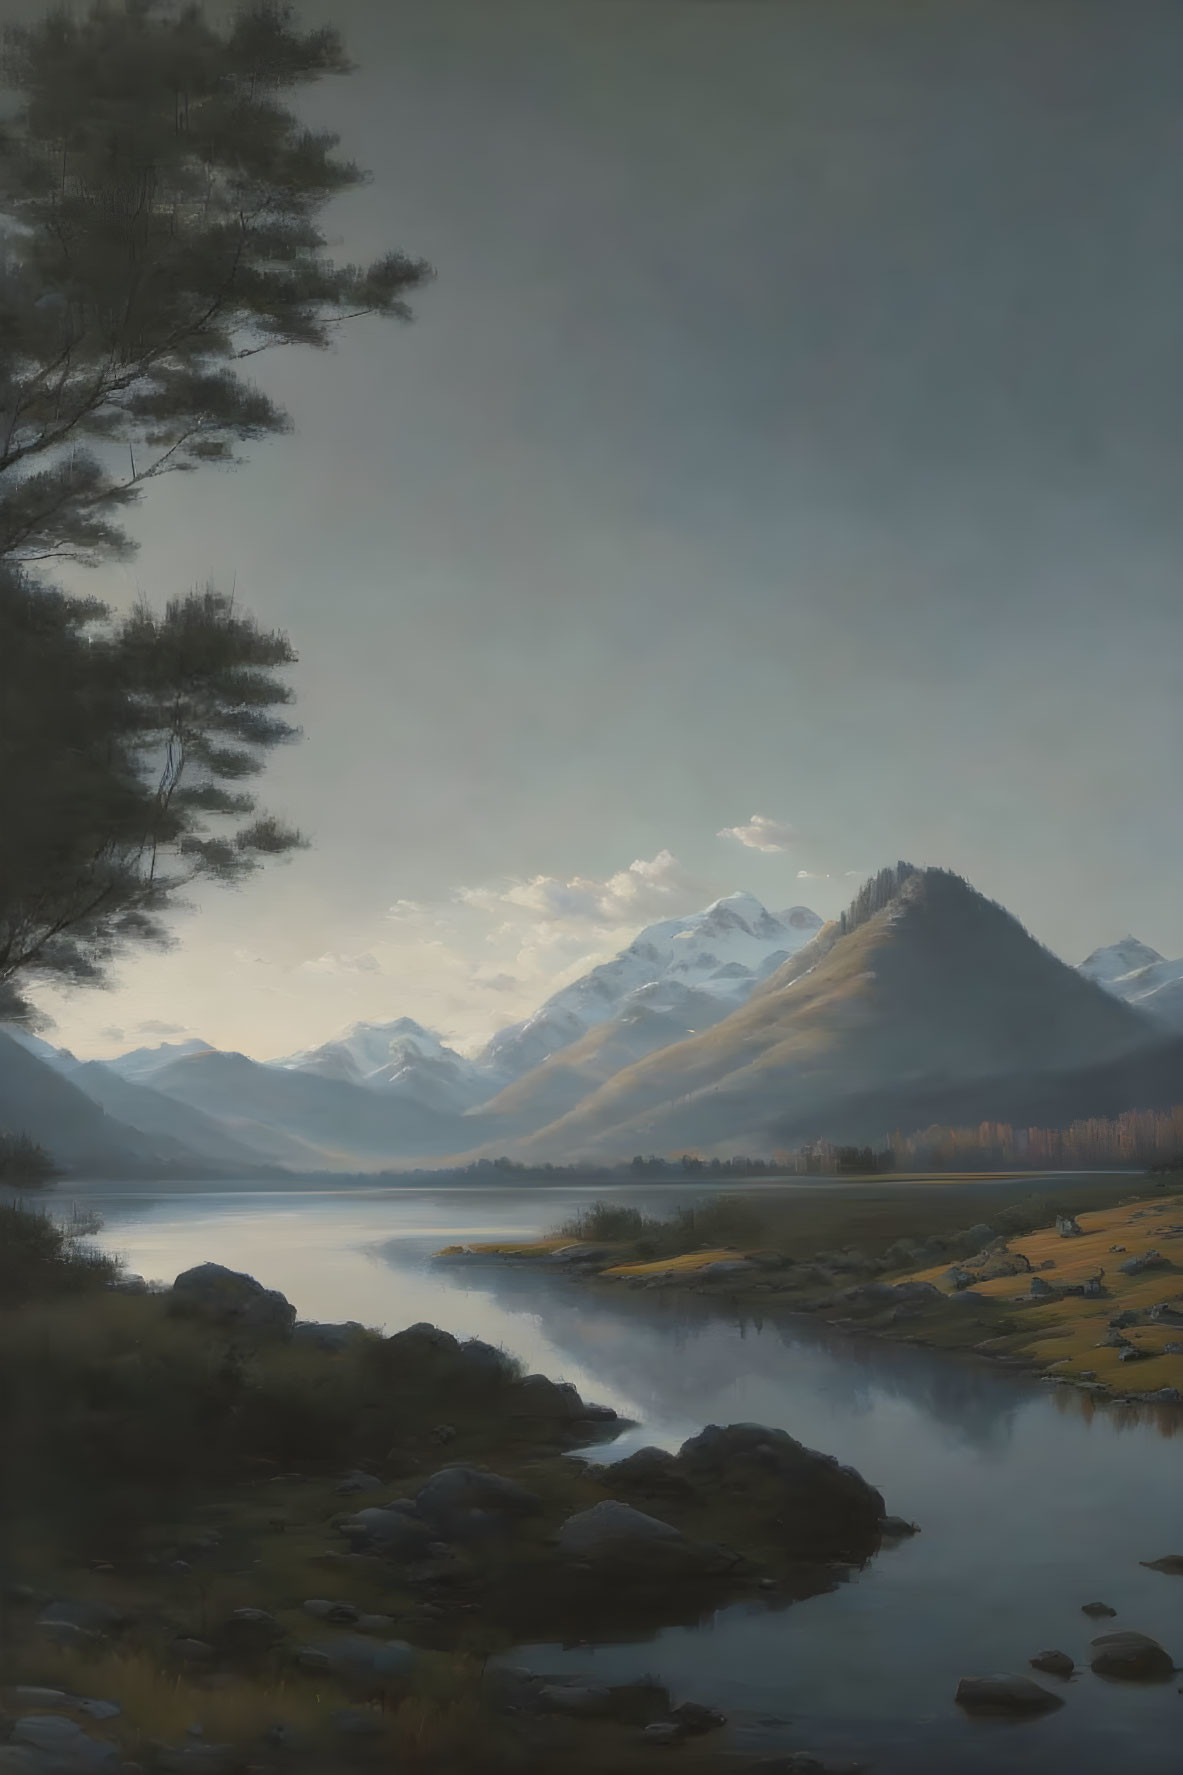  Landscape painting, view of a river with mountain